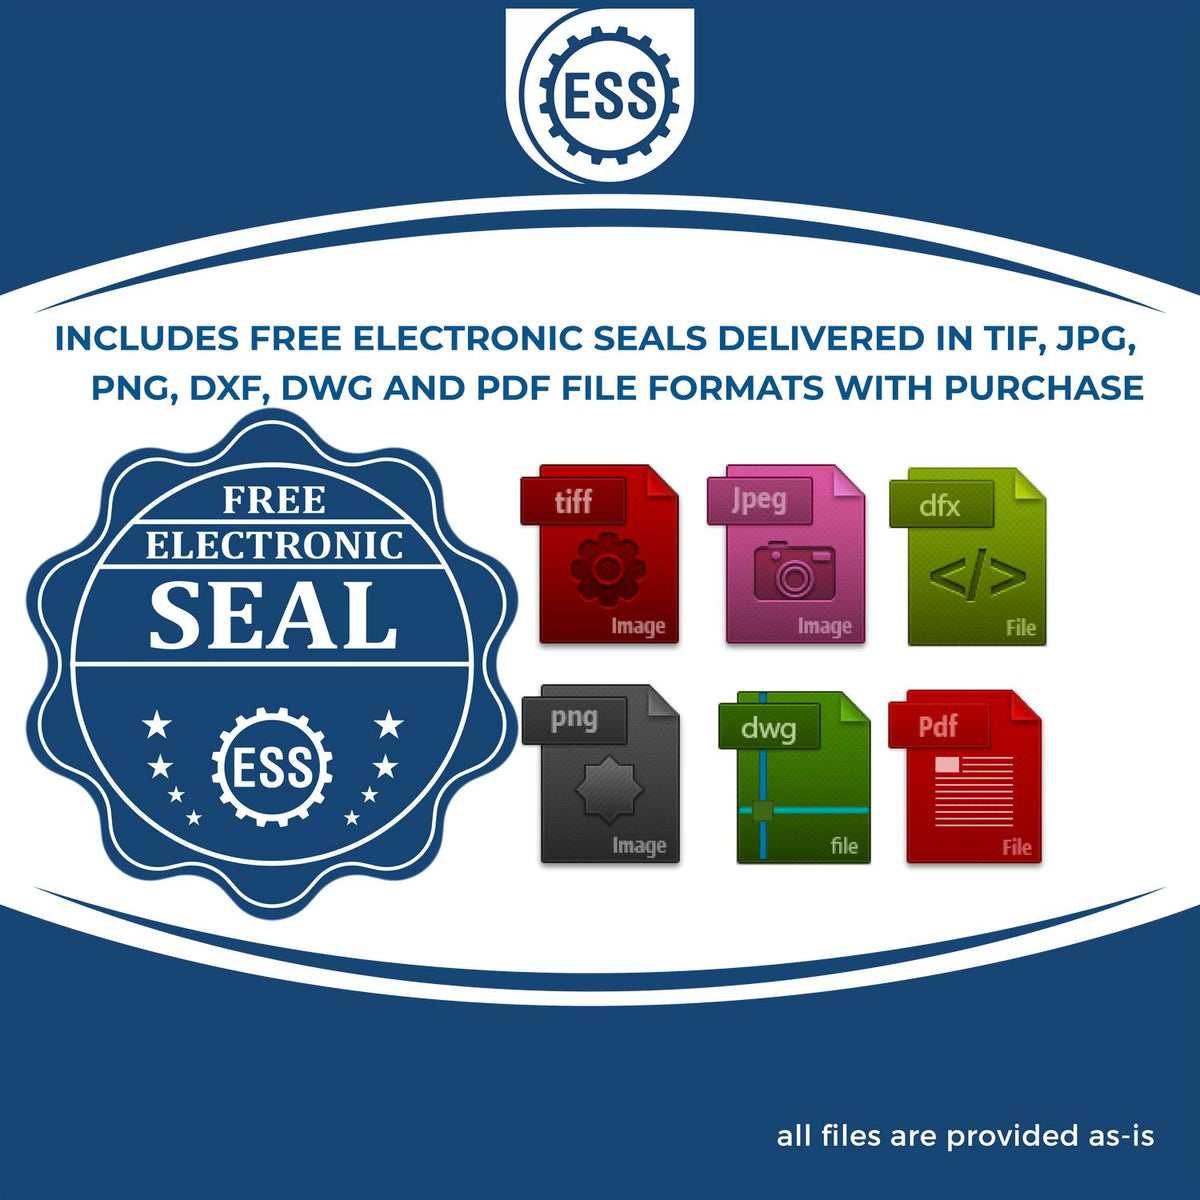 An infographic for the free electronic seal for the Self-Inking Wisconsin Geologist Stamp illustrating the different file type icons such as DXF, DWG, TIF, JPG and PNG.